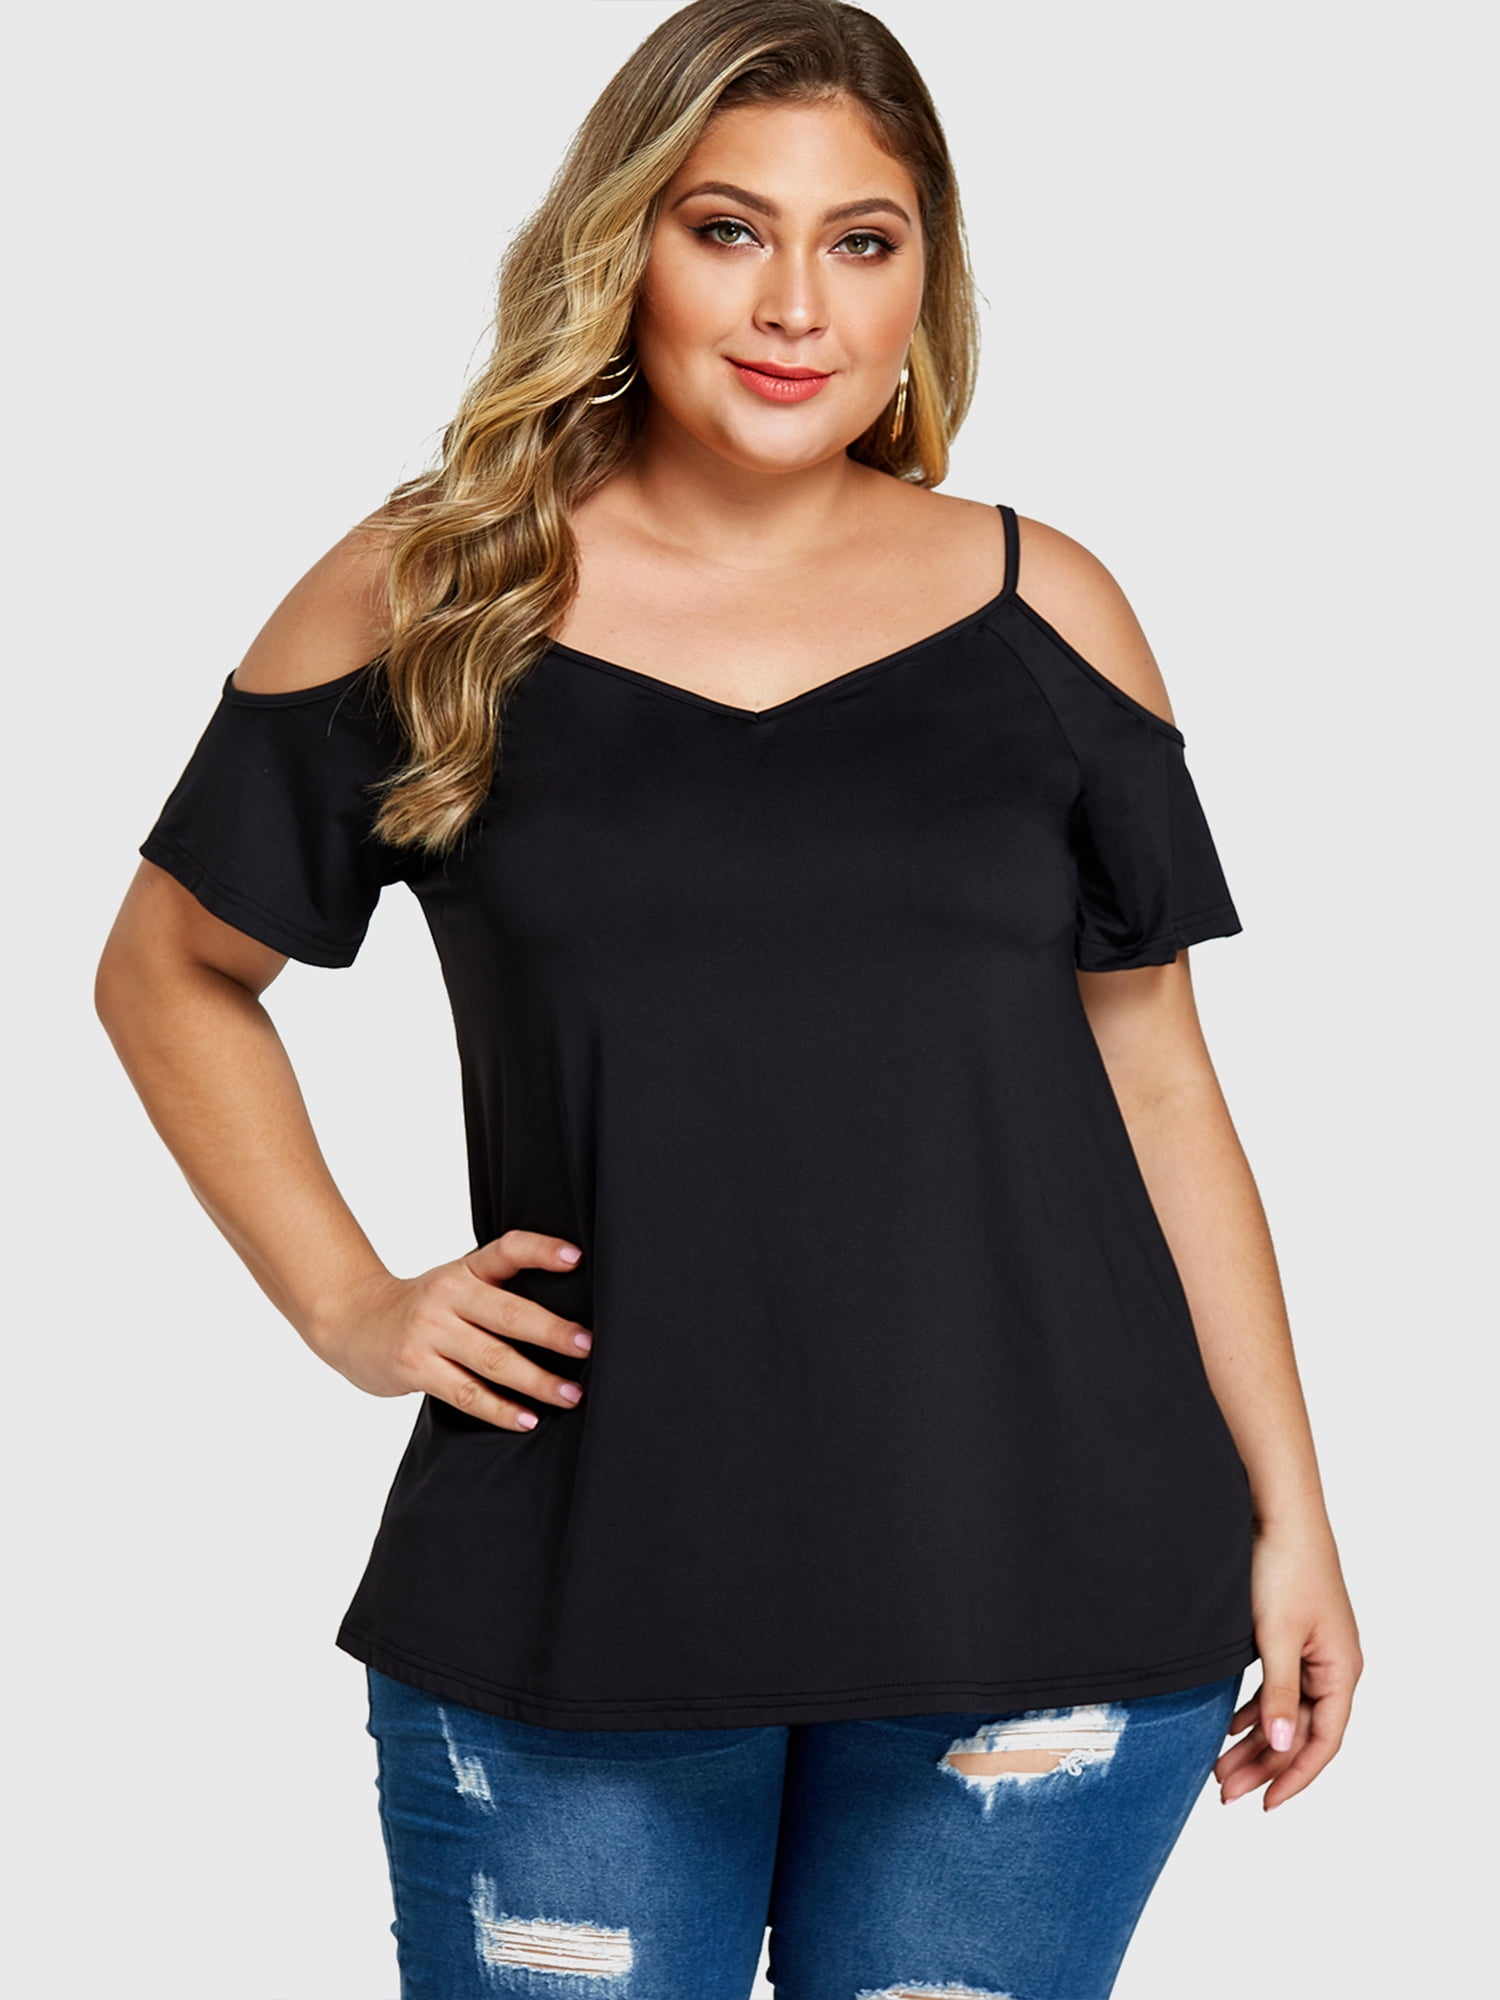 Women Shirts and Blouses Fashion Ladies Plus Size V Neck Hollow Out Cut Out Strappy T-Shirt Tops Loose Blouse 